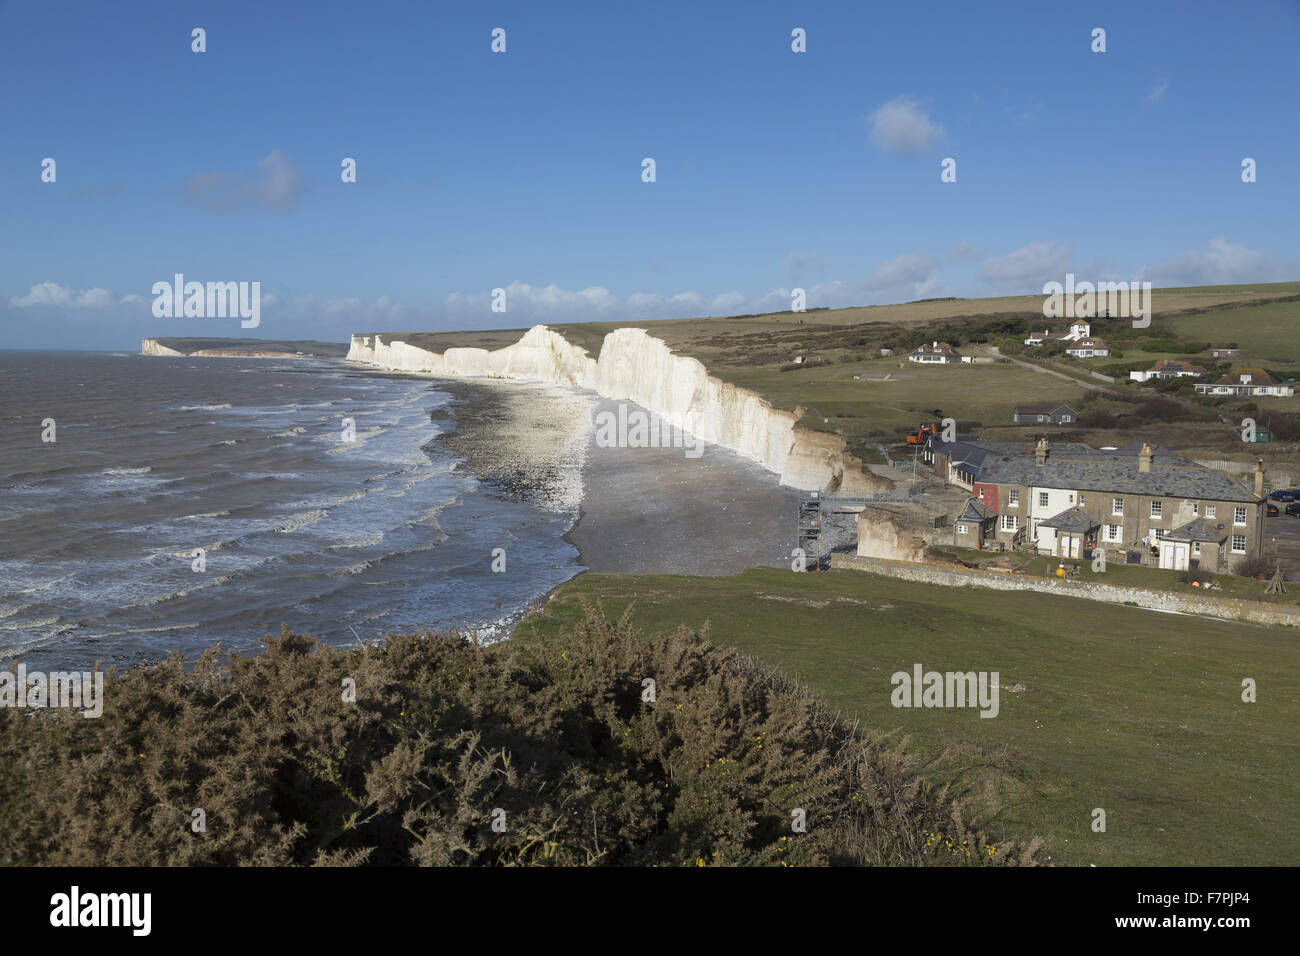 View of the storm-damaged cliffs and beach at Birling Gap, East Sussex, pictured here in February 2014, with demolition work seen taking place on vulnerable clifftop buildings. Extreme weather in January and February of that year resulted in seven years' Stock Photo